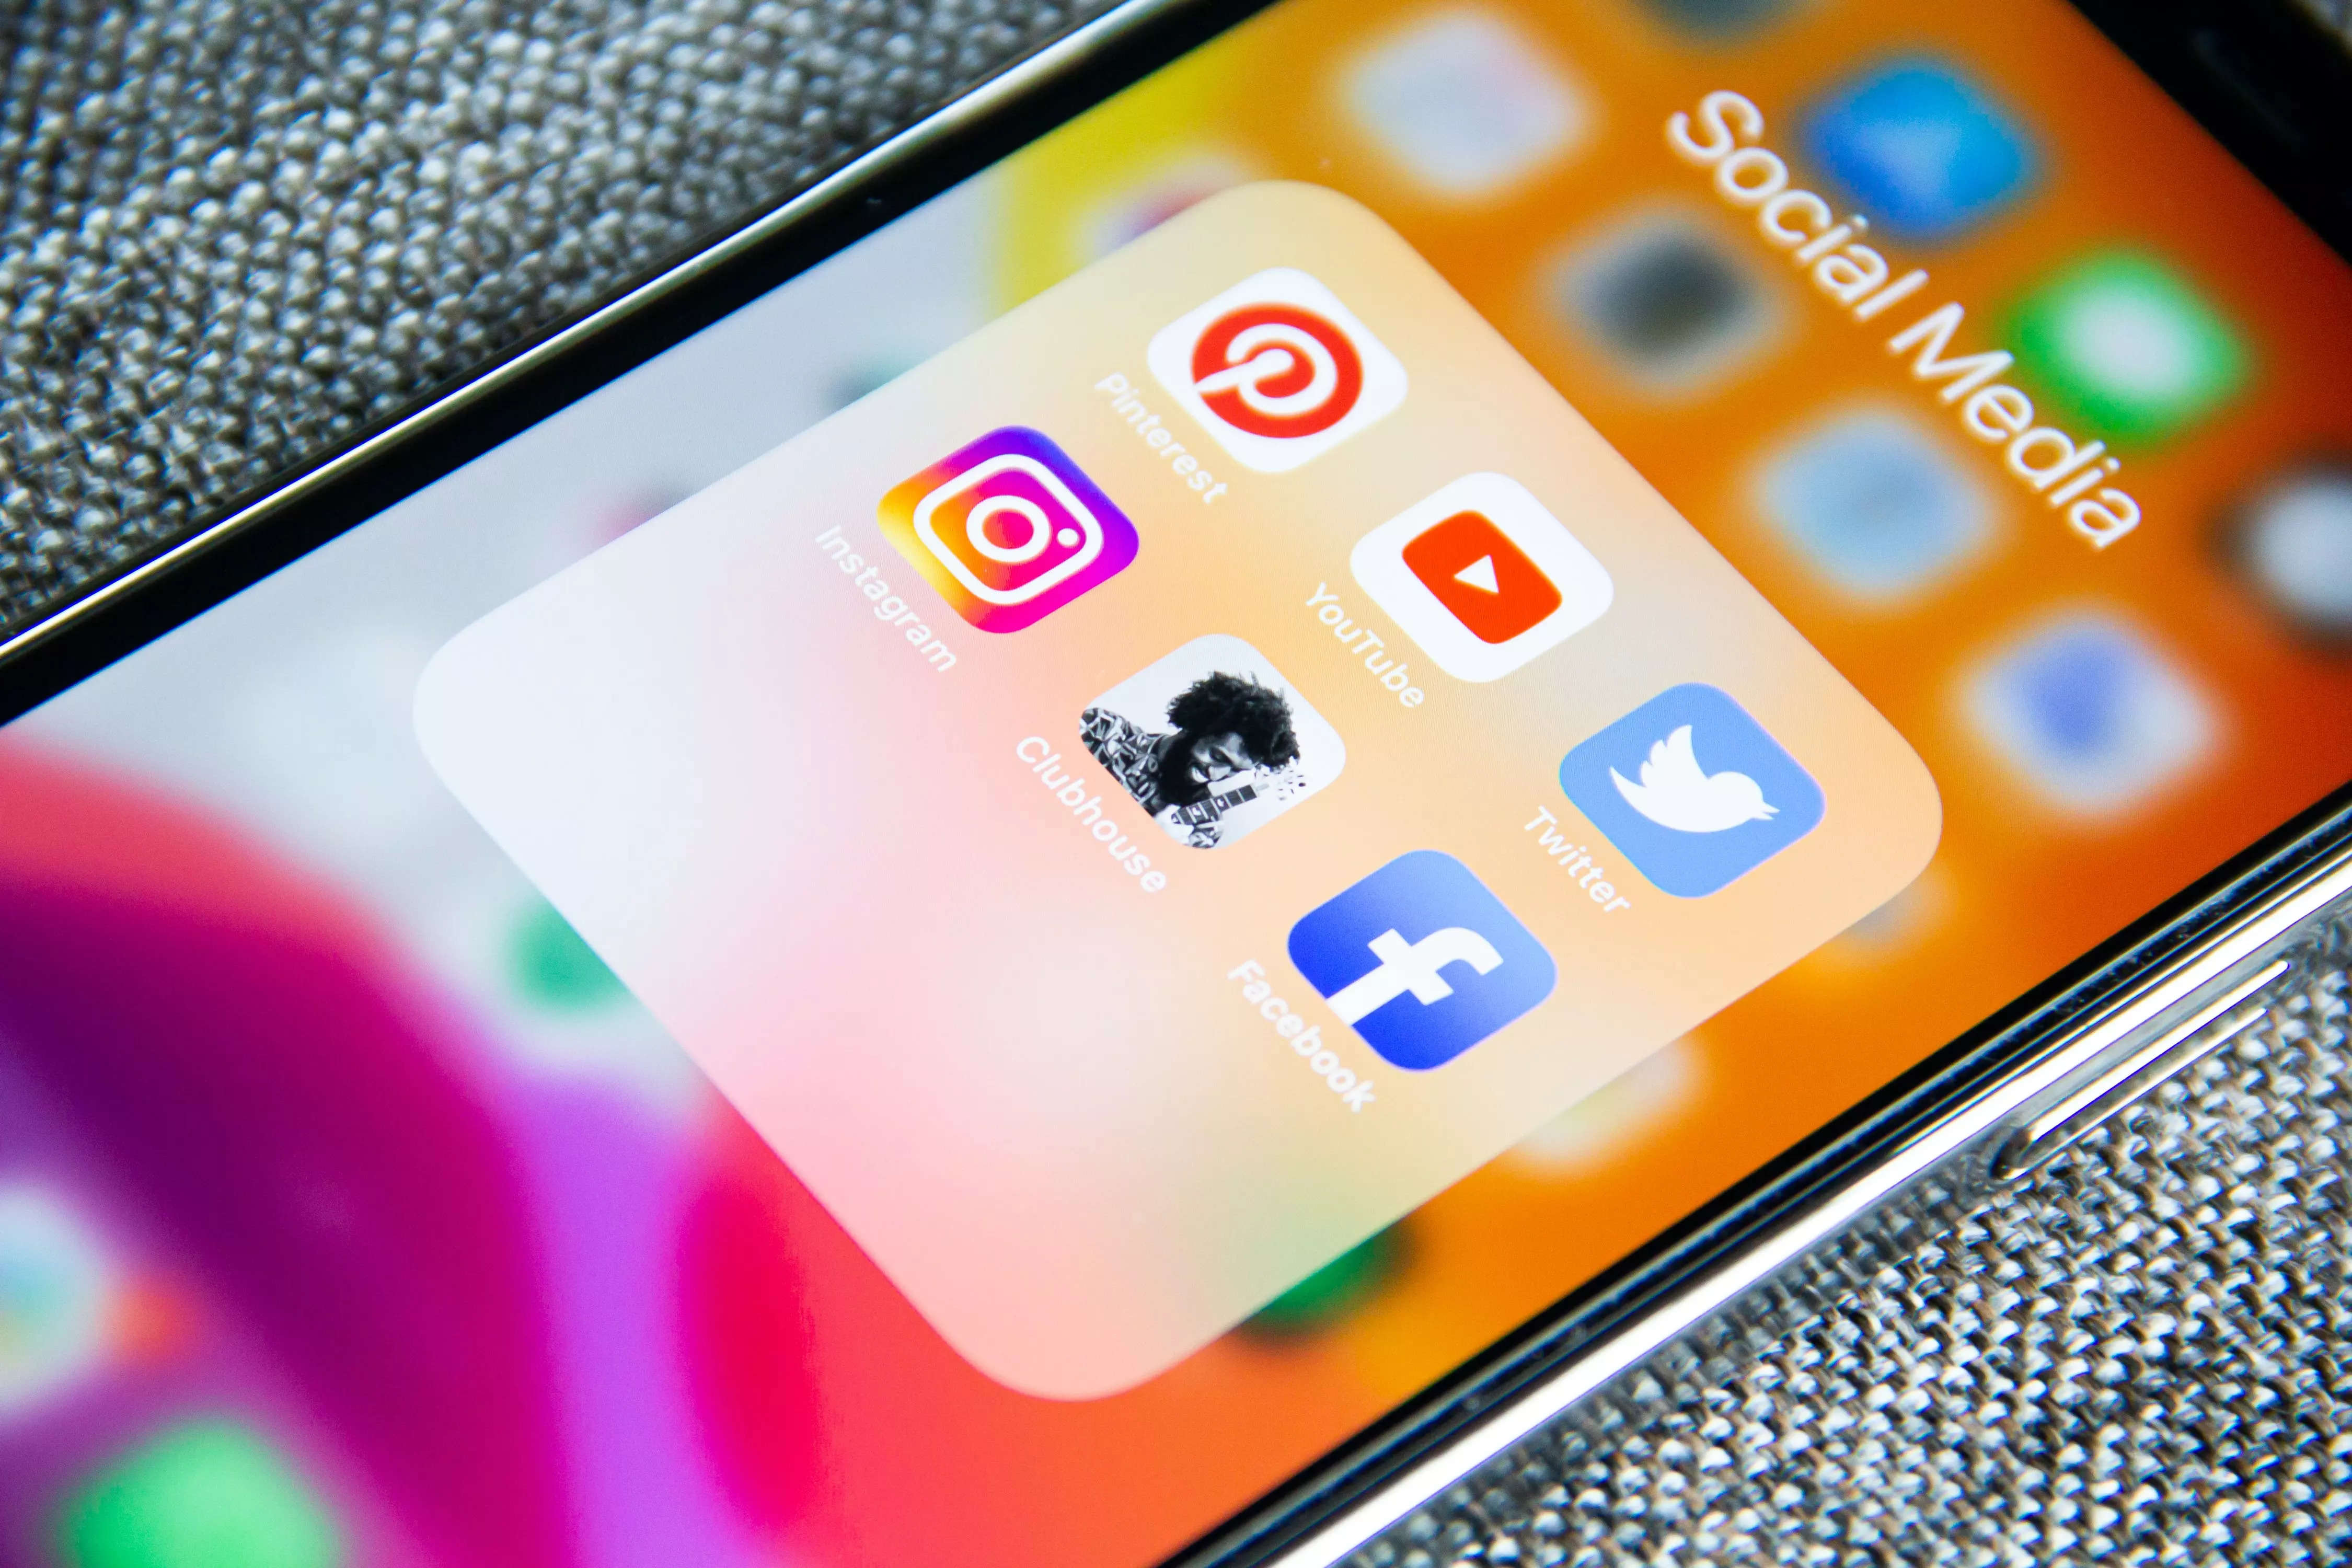 
Social media ad spends to reach $177 billion in 2022, overtaking television at $174 billion: Zenith report
